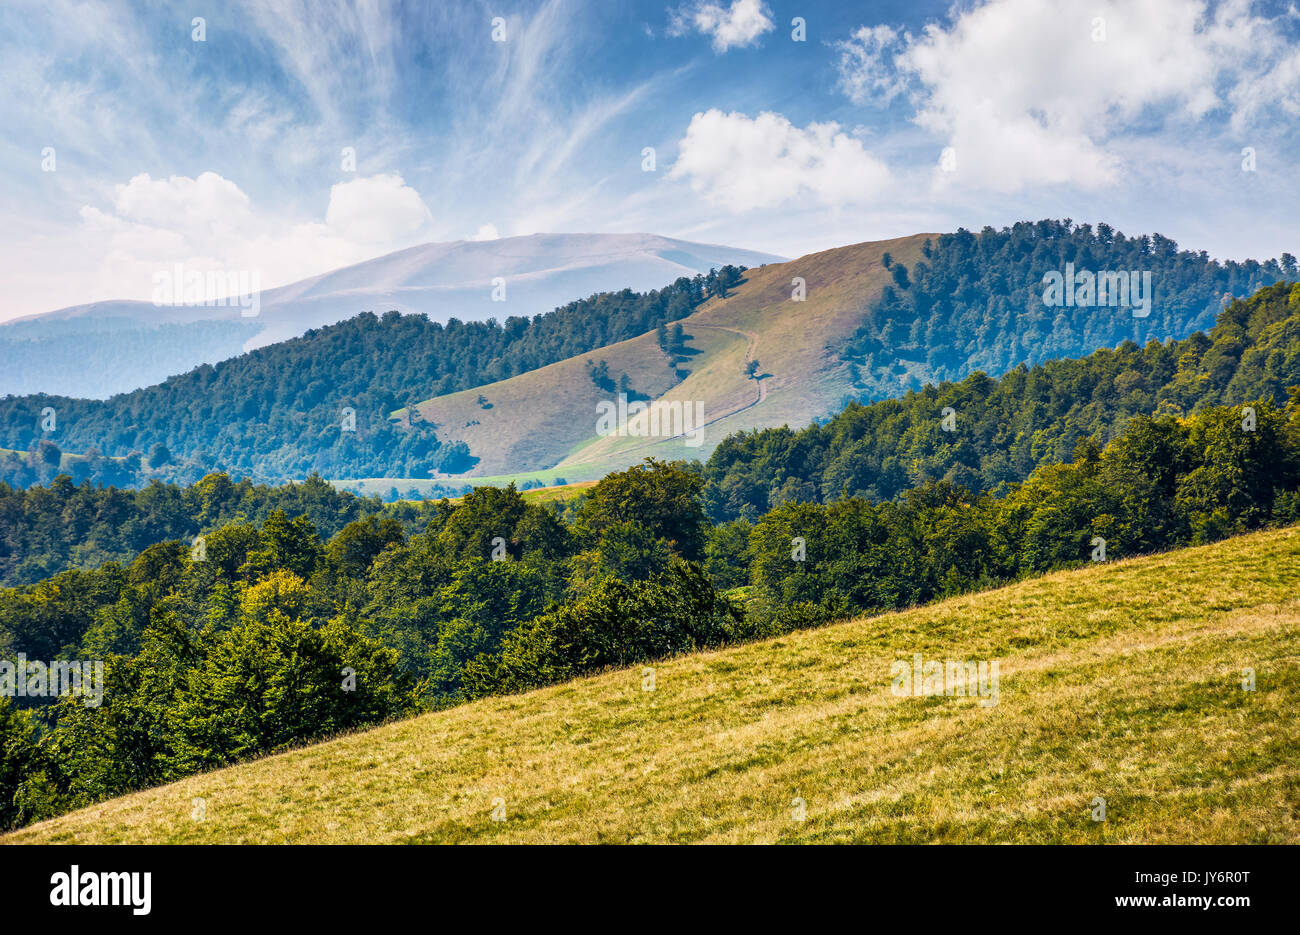 gorgeous early autumn landscape in mountains under blue sky with spectacular cloud formations. multi layered scene with meadow and forest on hillside  Stock Photo